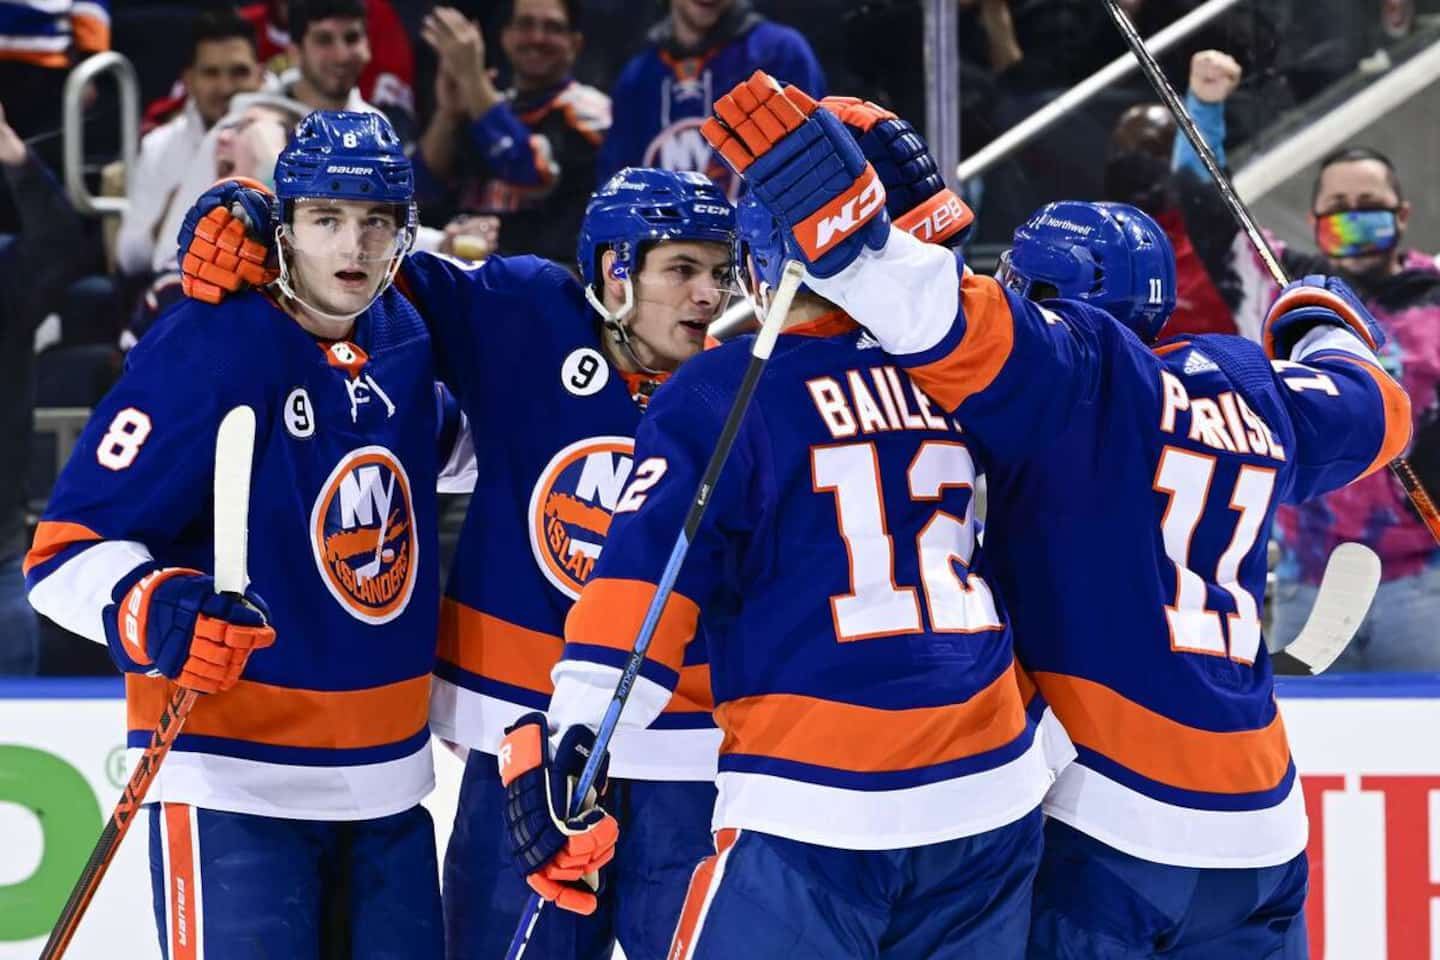 The Islanders play big in the 'Mega Millions' lottery